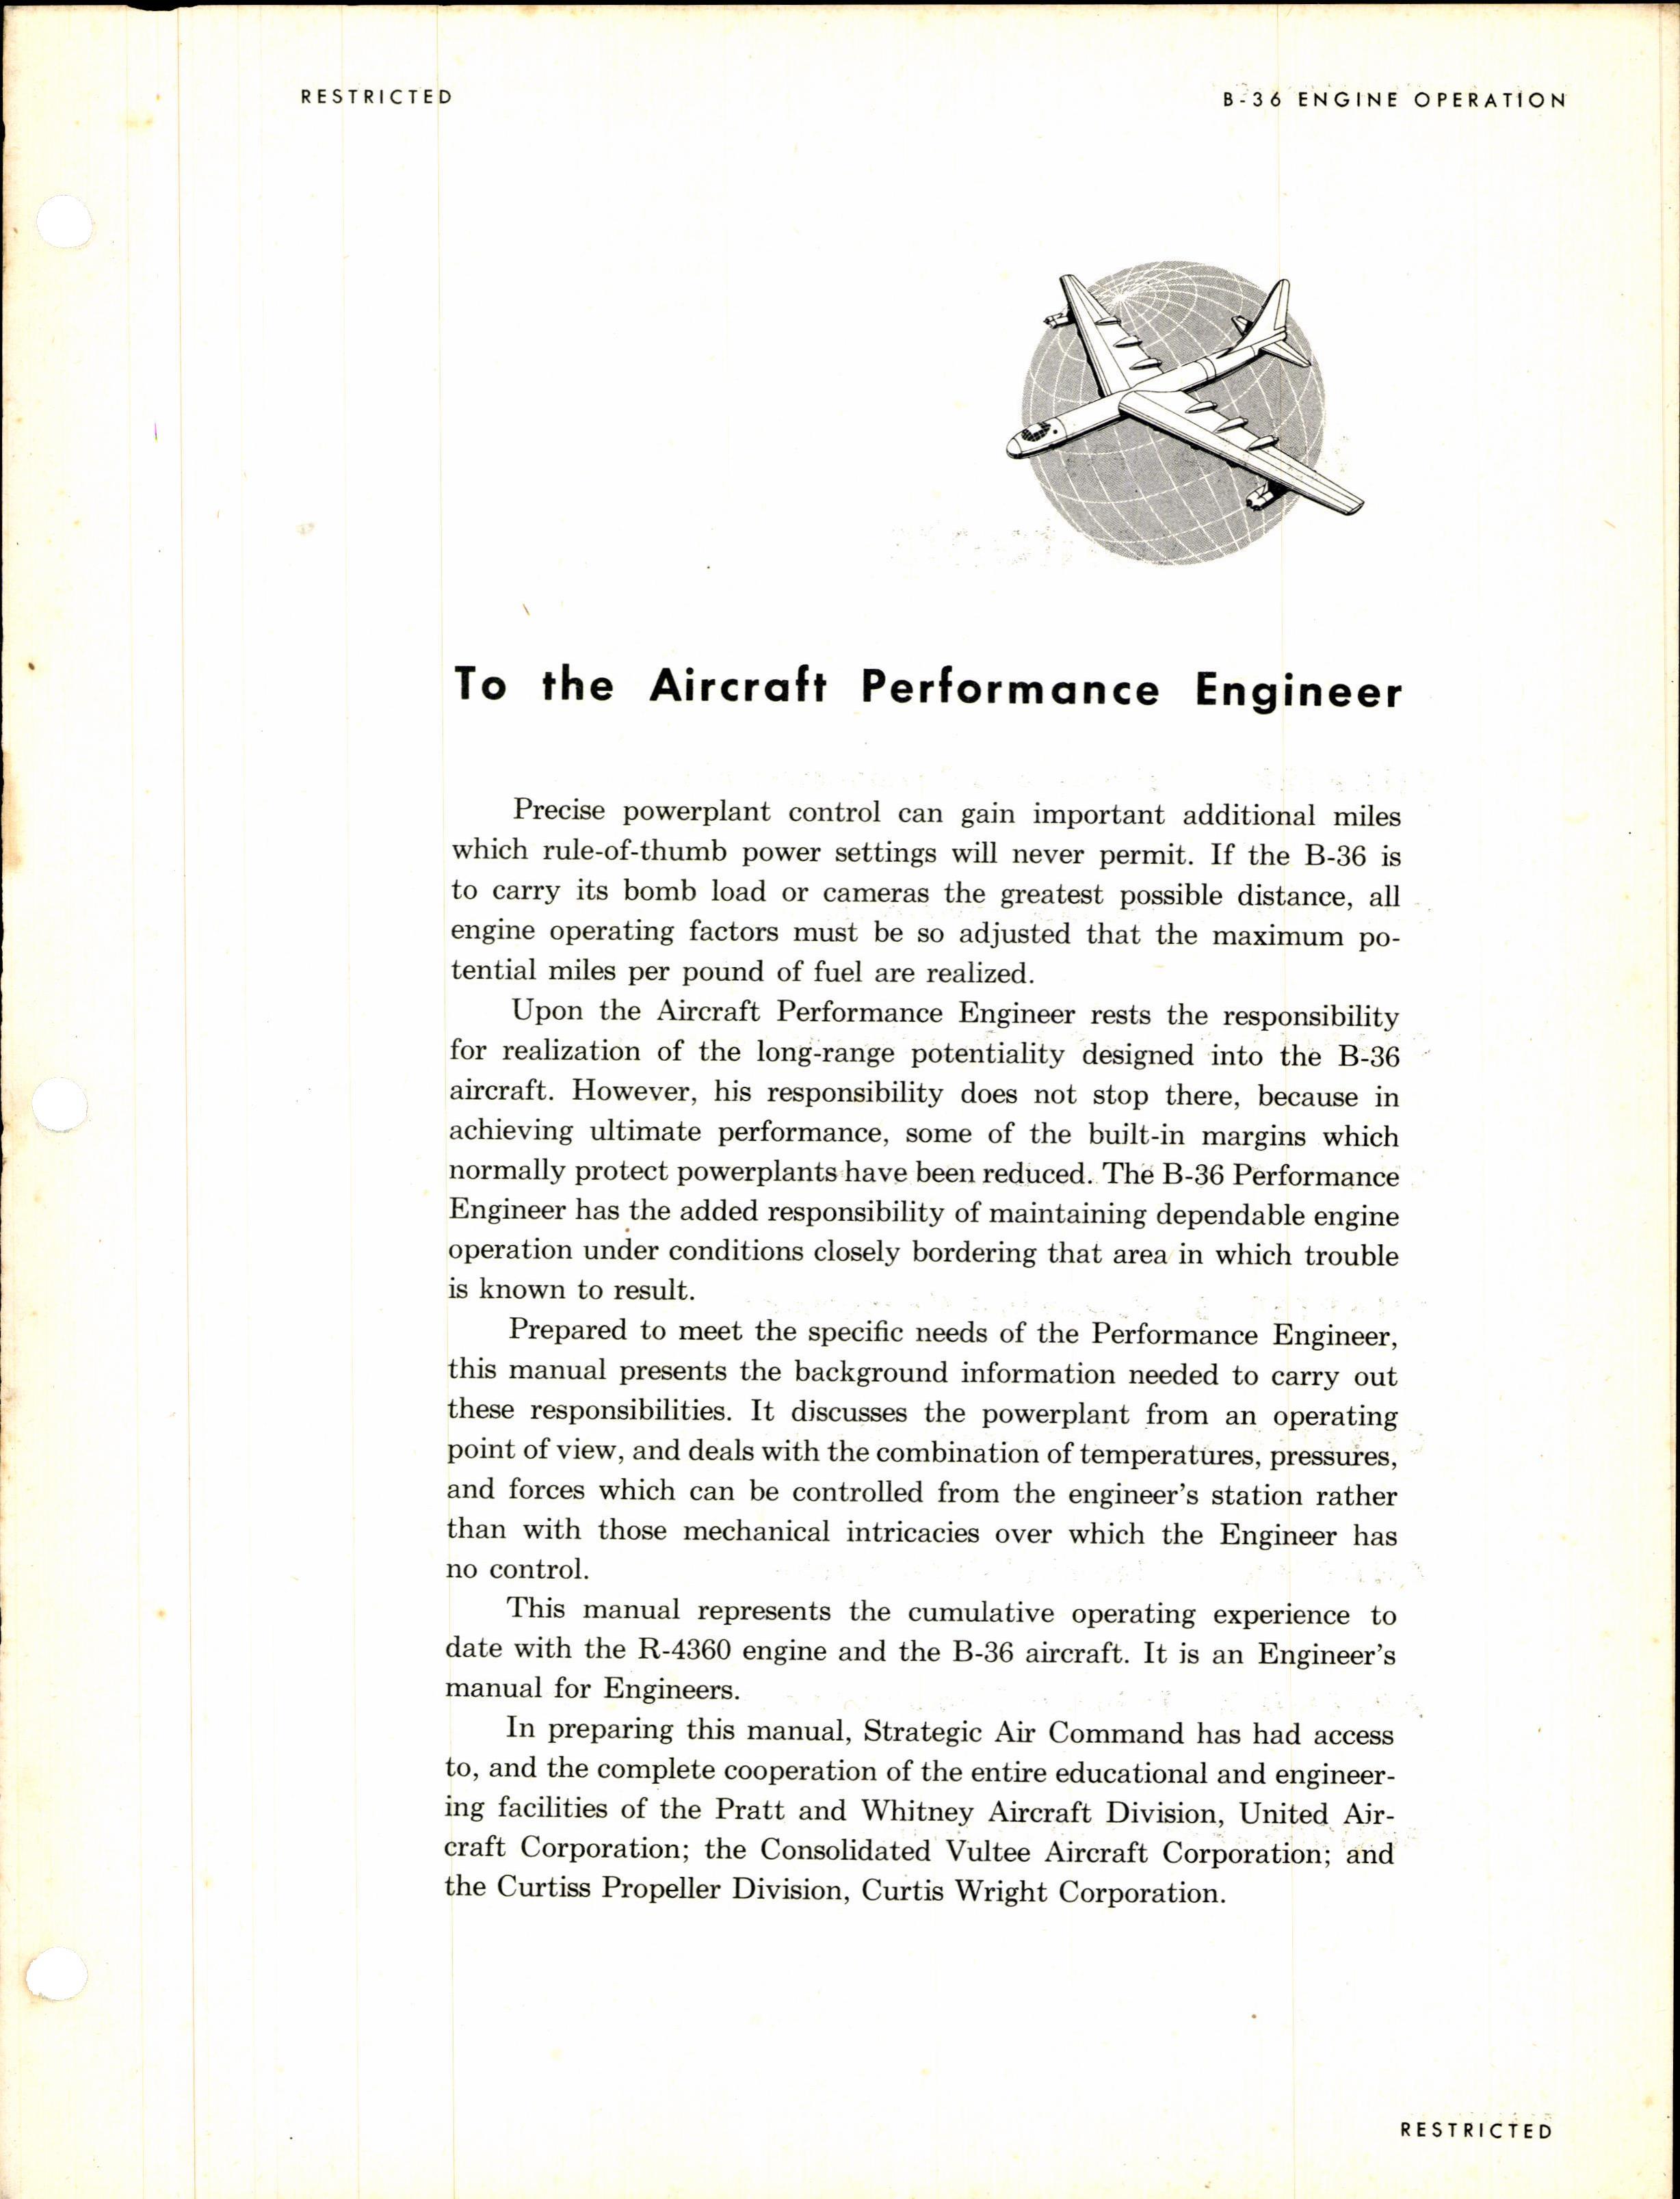 Sample page 5 from AirCorps Library document: Aircraft Performance Engineer's Manual for B-36 Aircraft Engine Operation